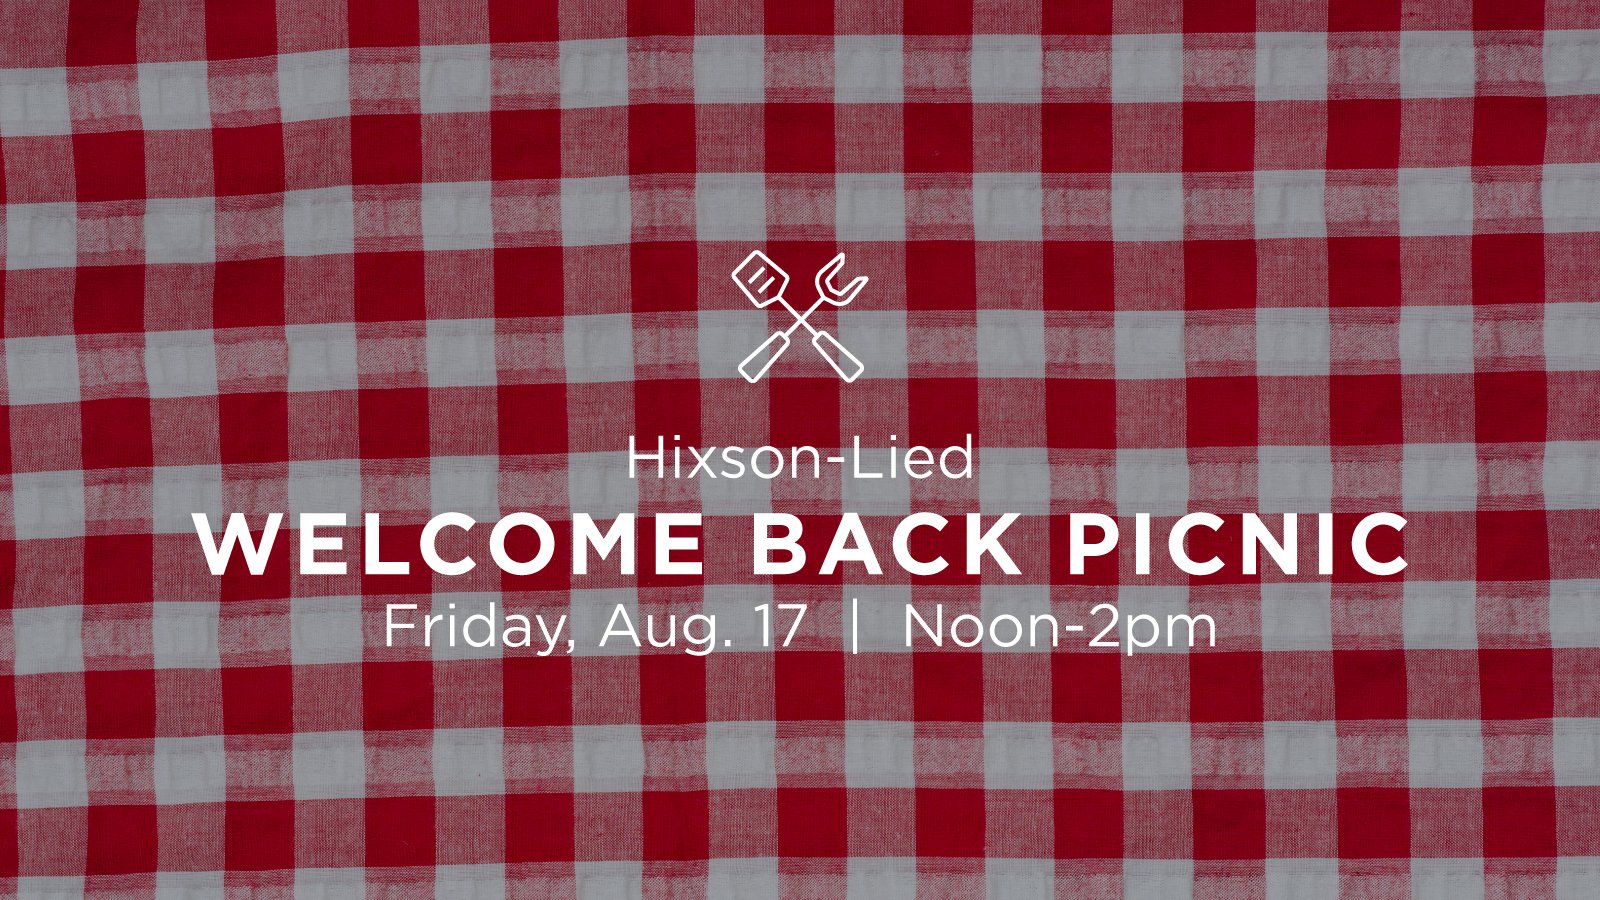 The Hixson-Lied College of Fine and Performing Arts Welcome Back Picnic is Aug. 17.